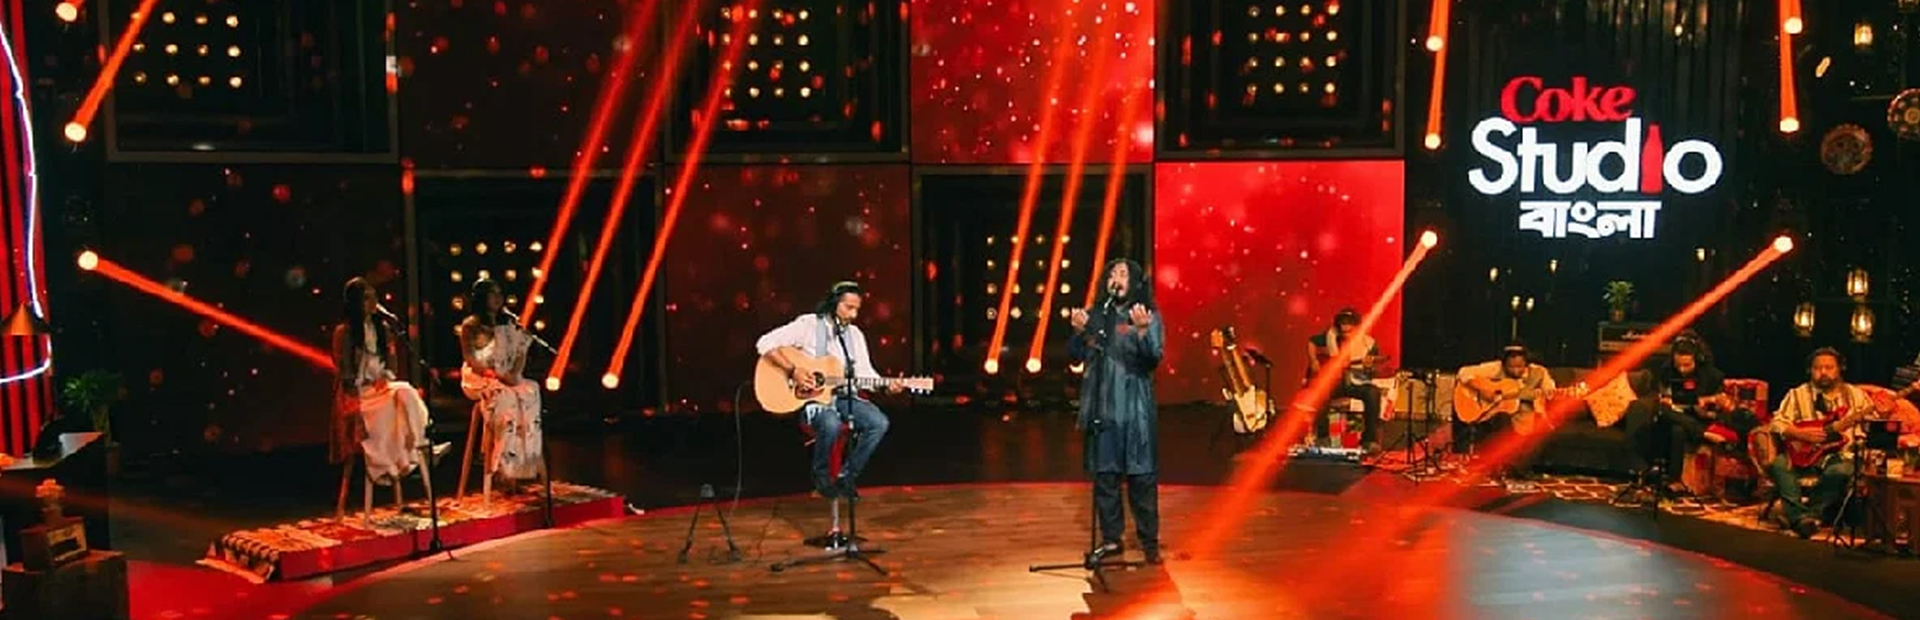 A still photo from the new release of Coke Studio Bangla